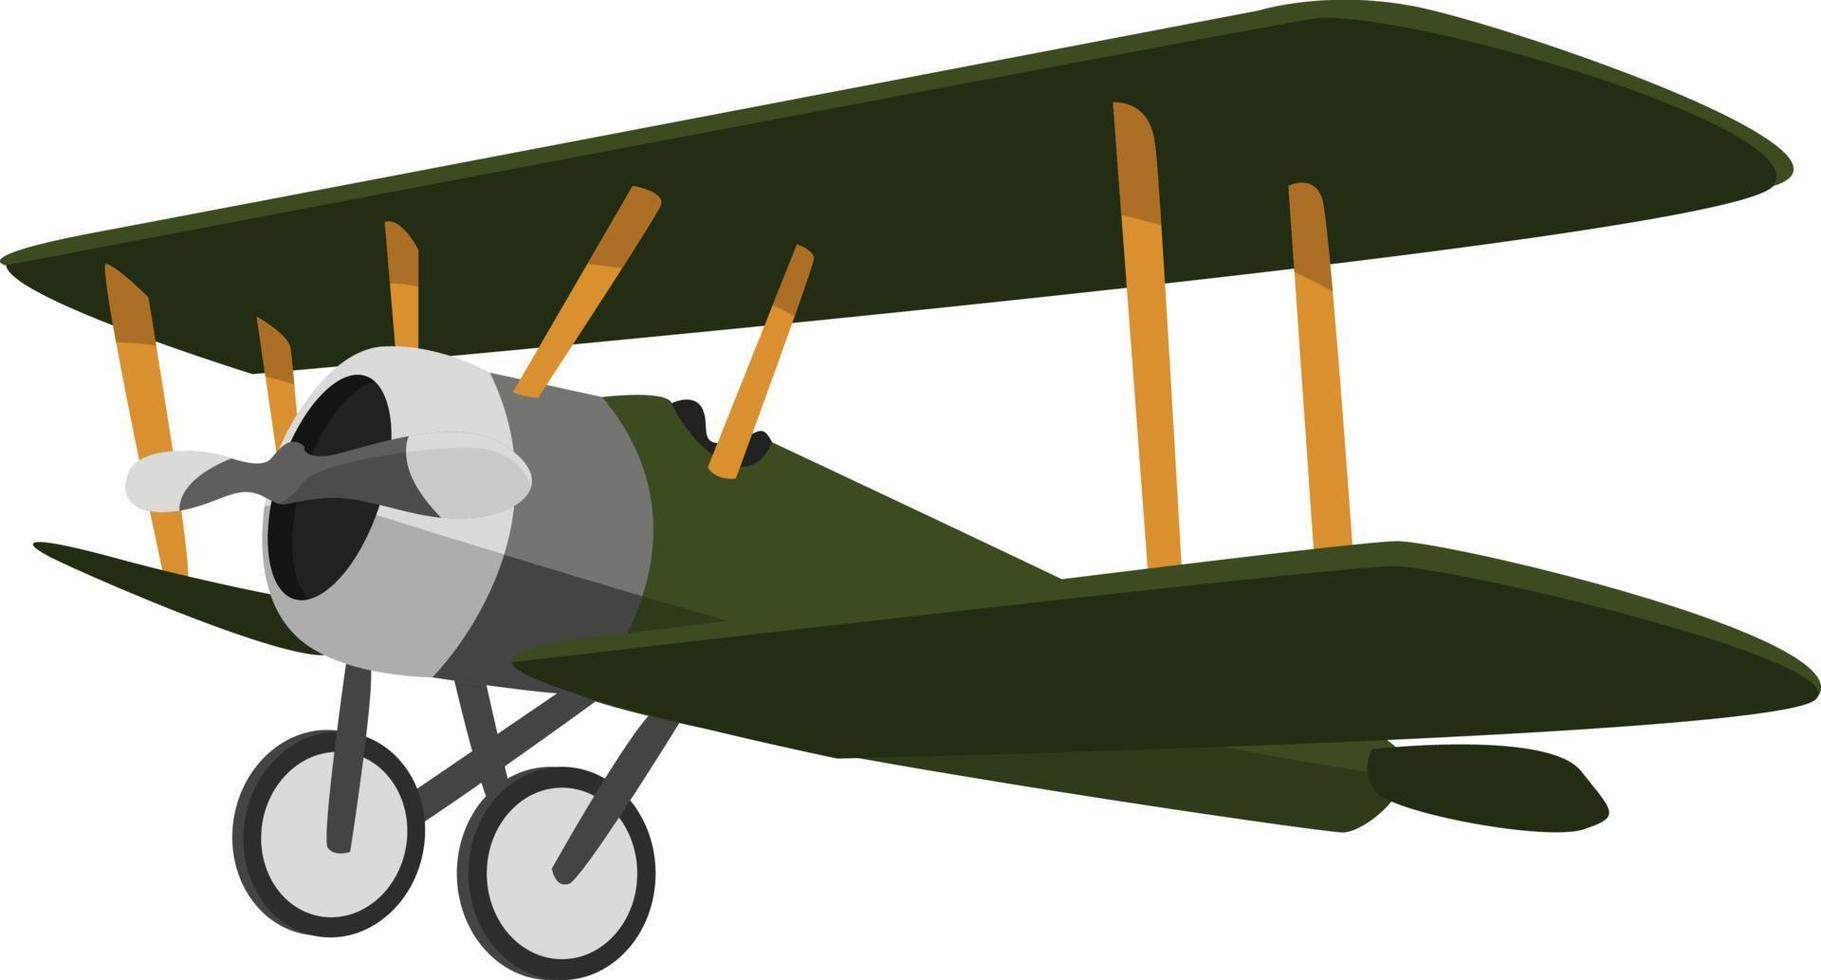 Green airplane , illustration, vector on white background